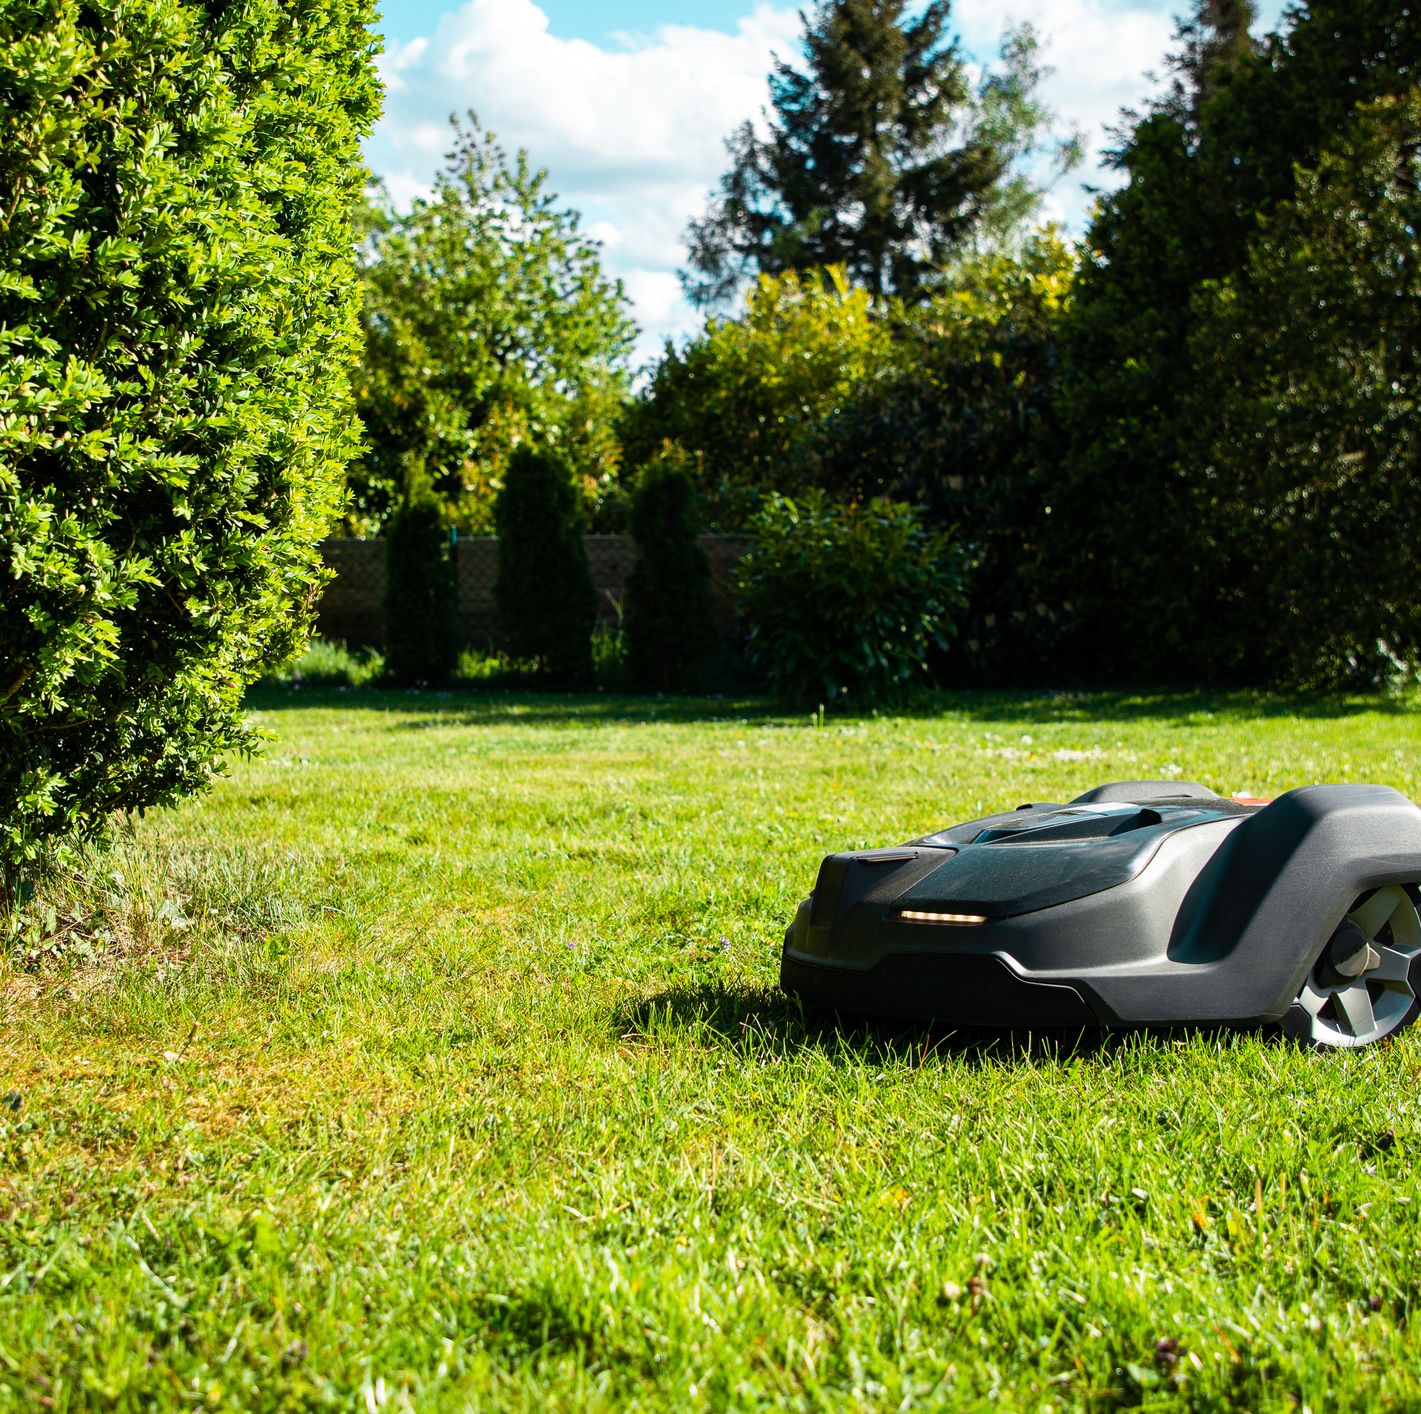 While You Weed the Garden, Cook Dinner, or Enjoy a Cold Beverage, These Robot Lawnmowers Will Cut the Grass For You